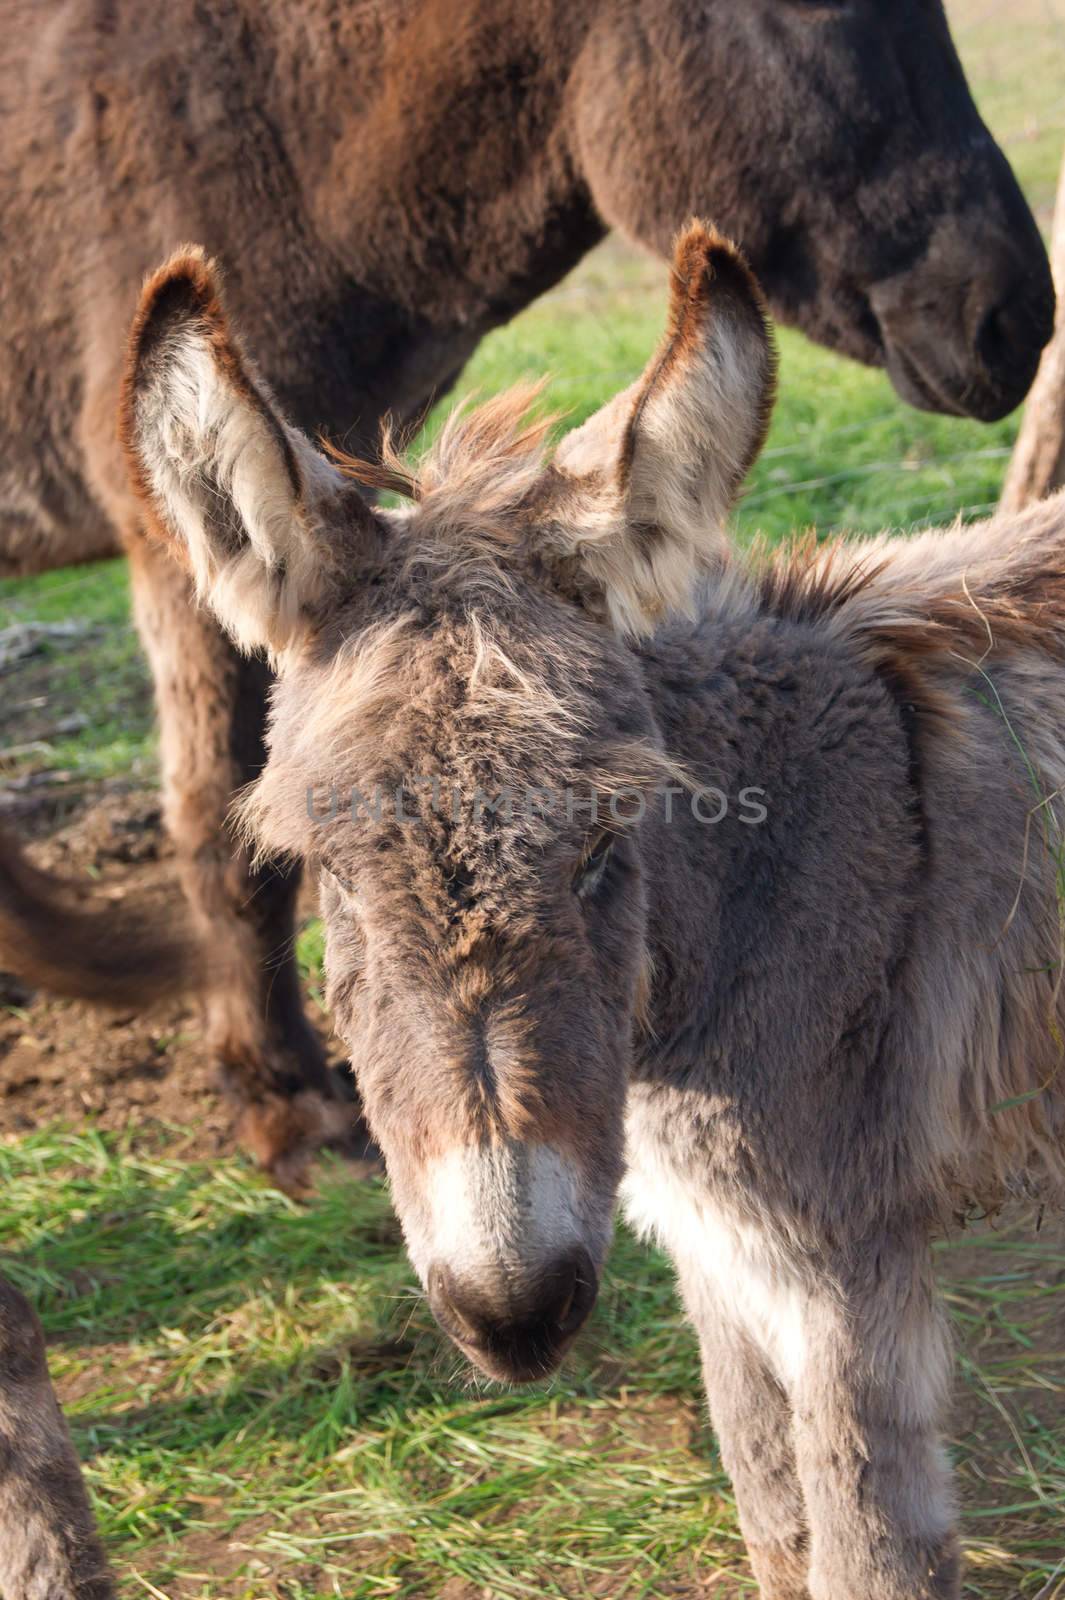 The donkeys are kept in the fold.